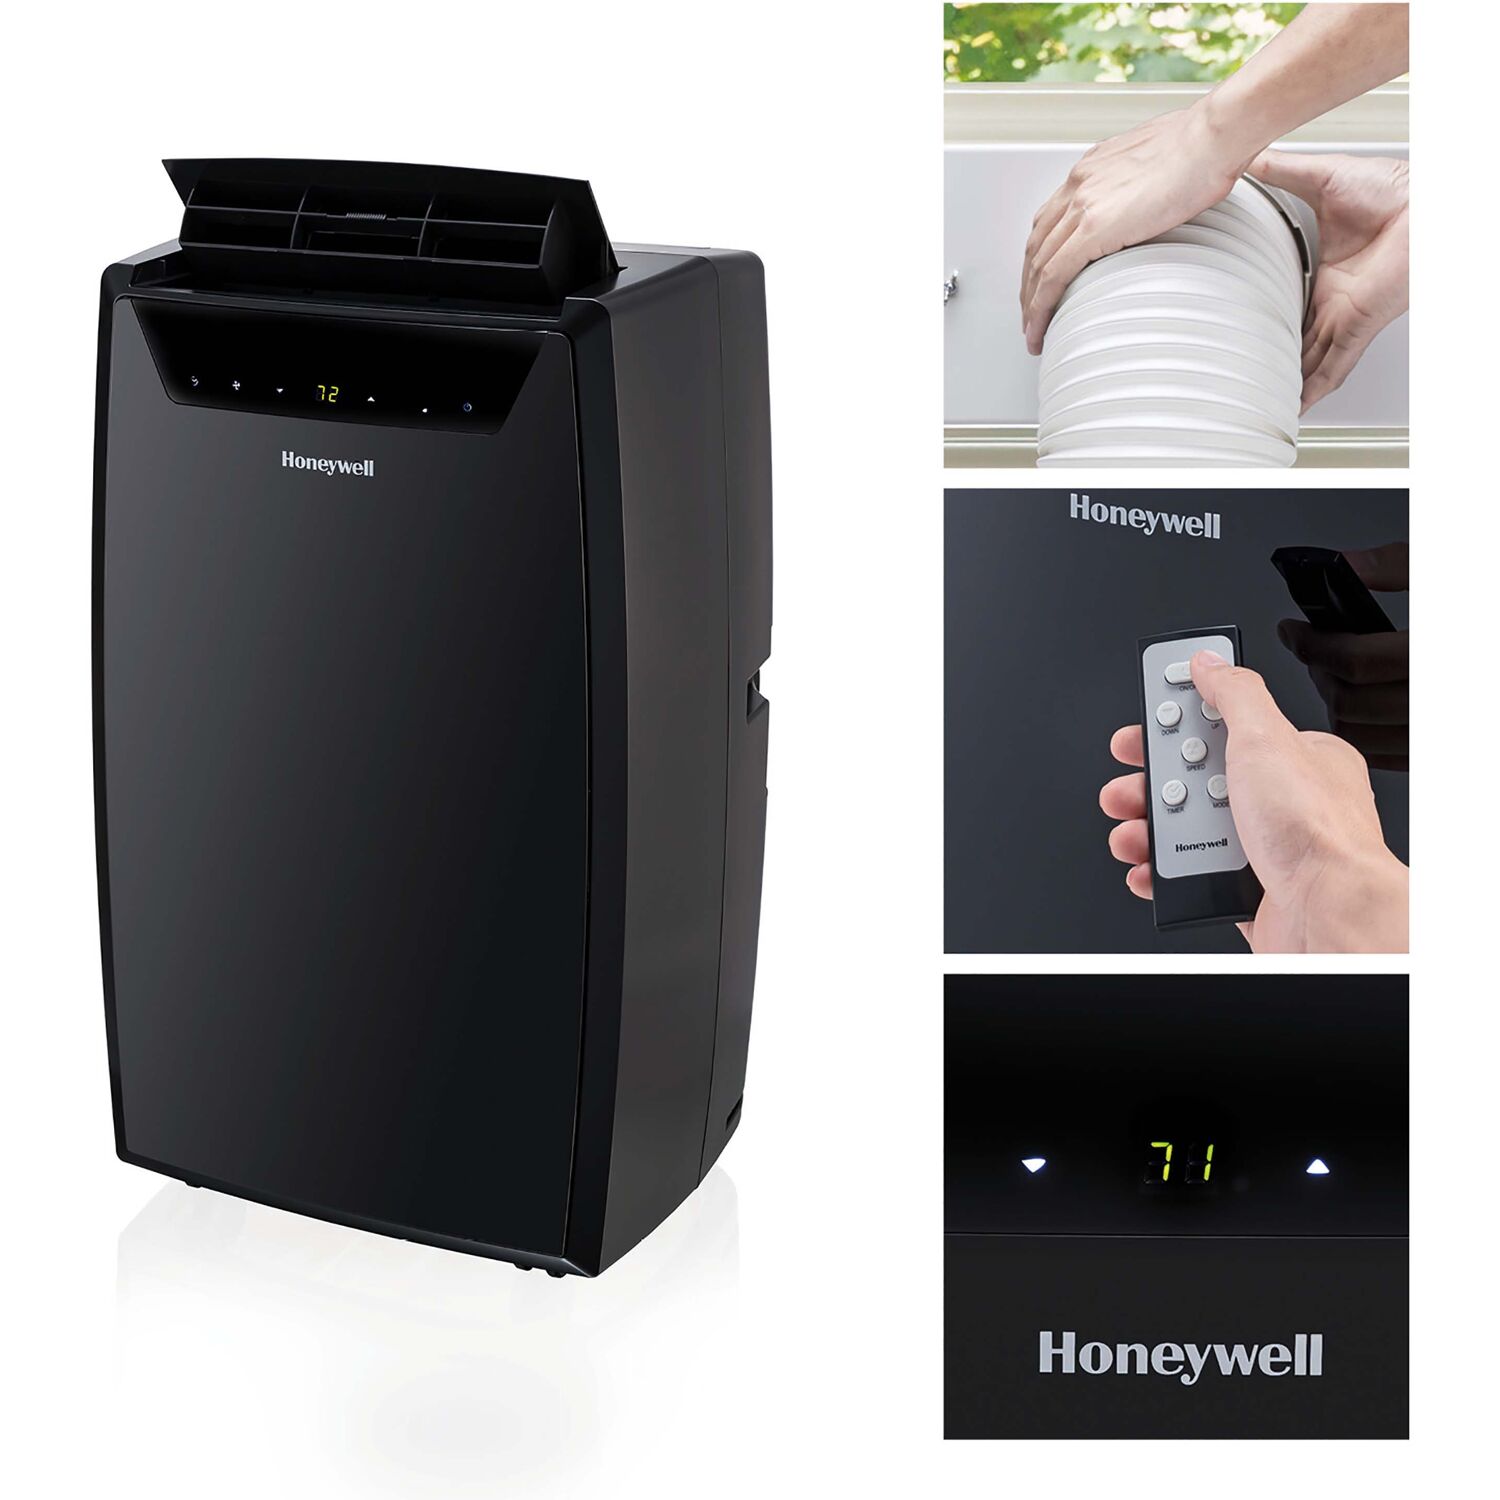 Honeywell 14,000 BTU Portable Air Conditioner, Dehumidifier and Fan - image 1 of 11